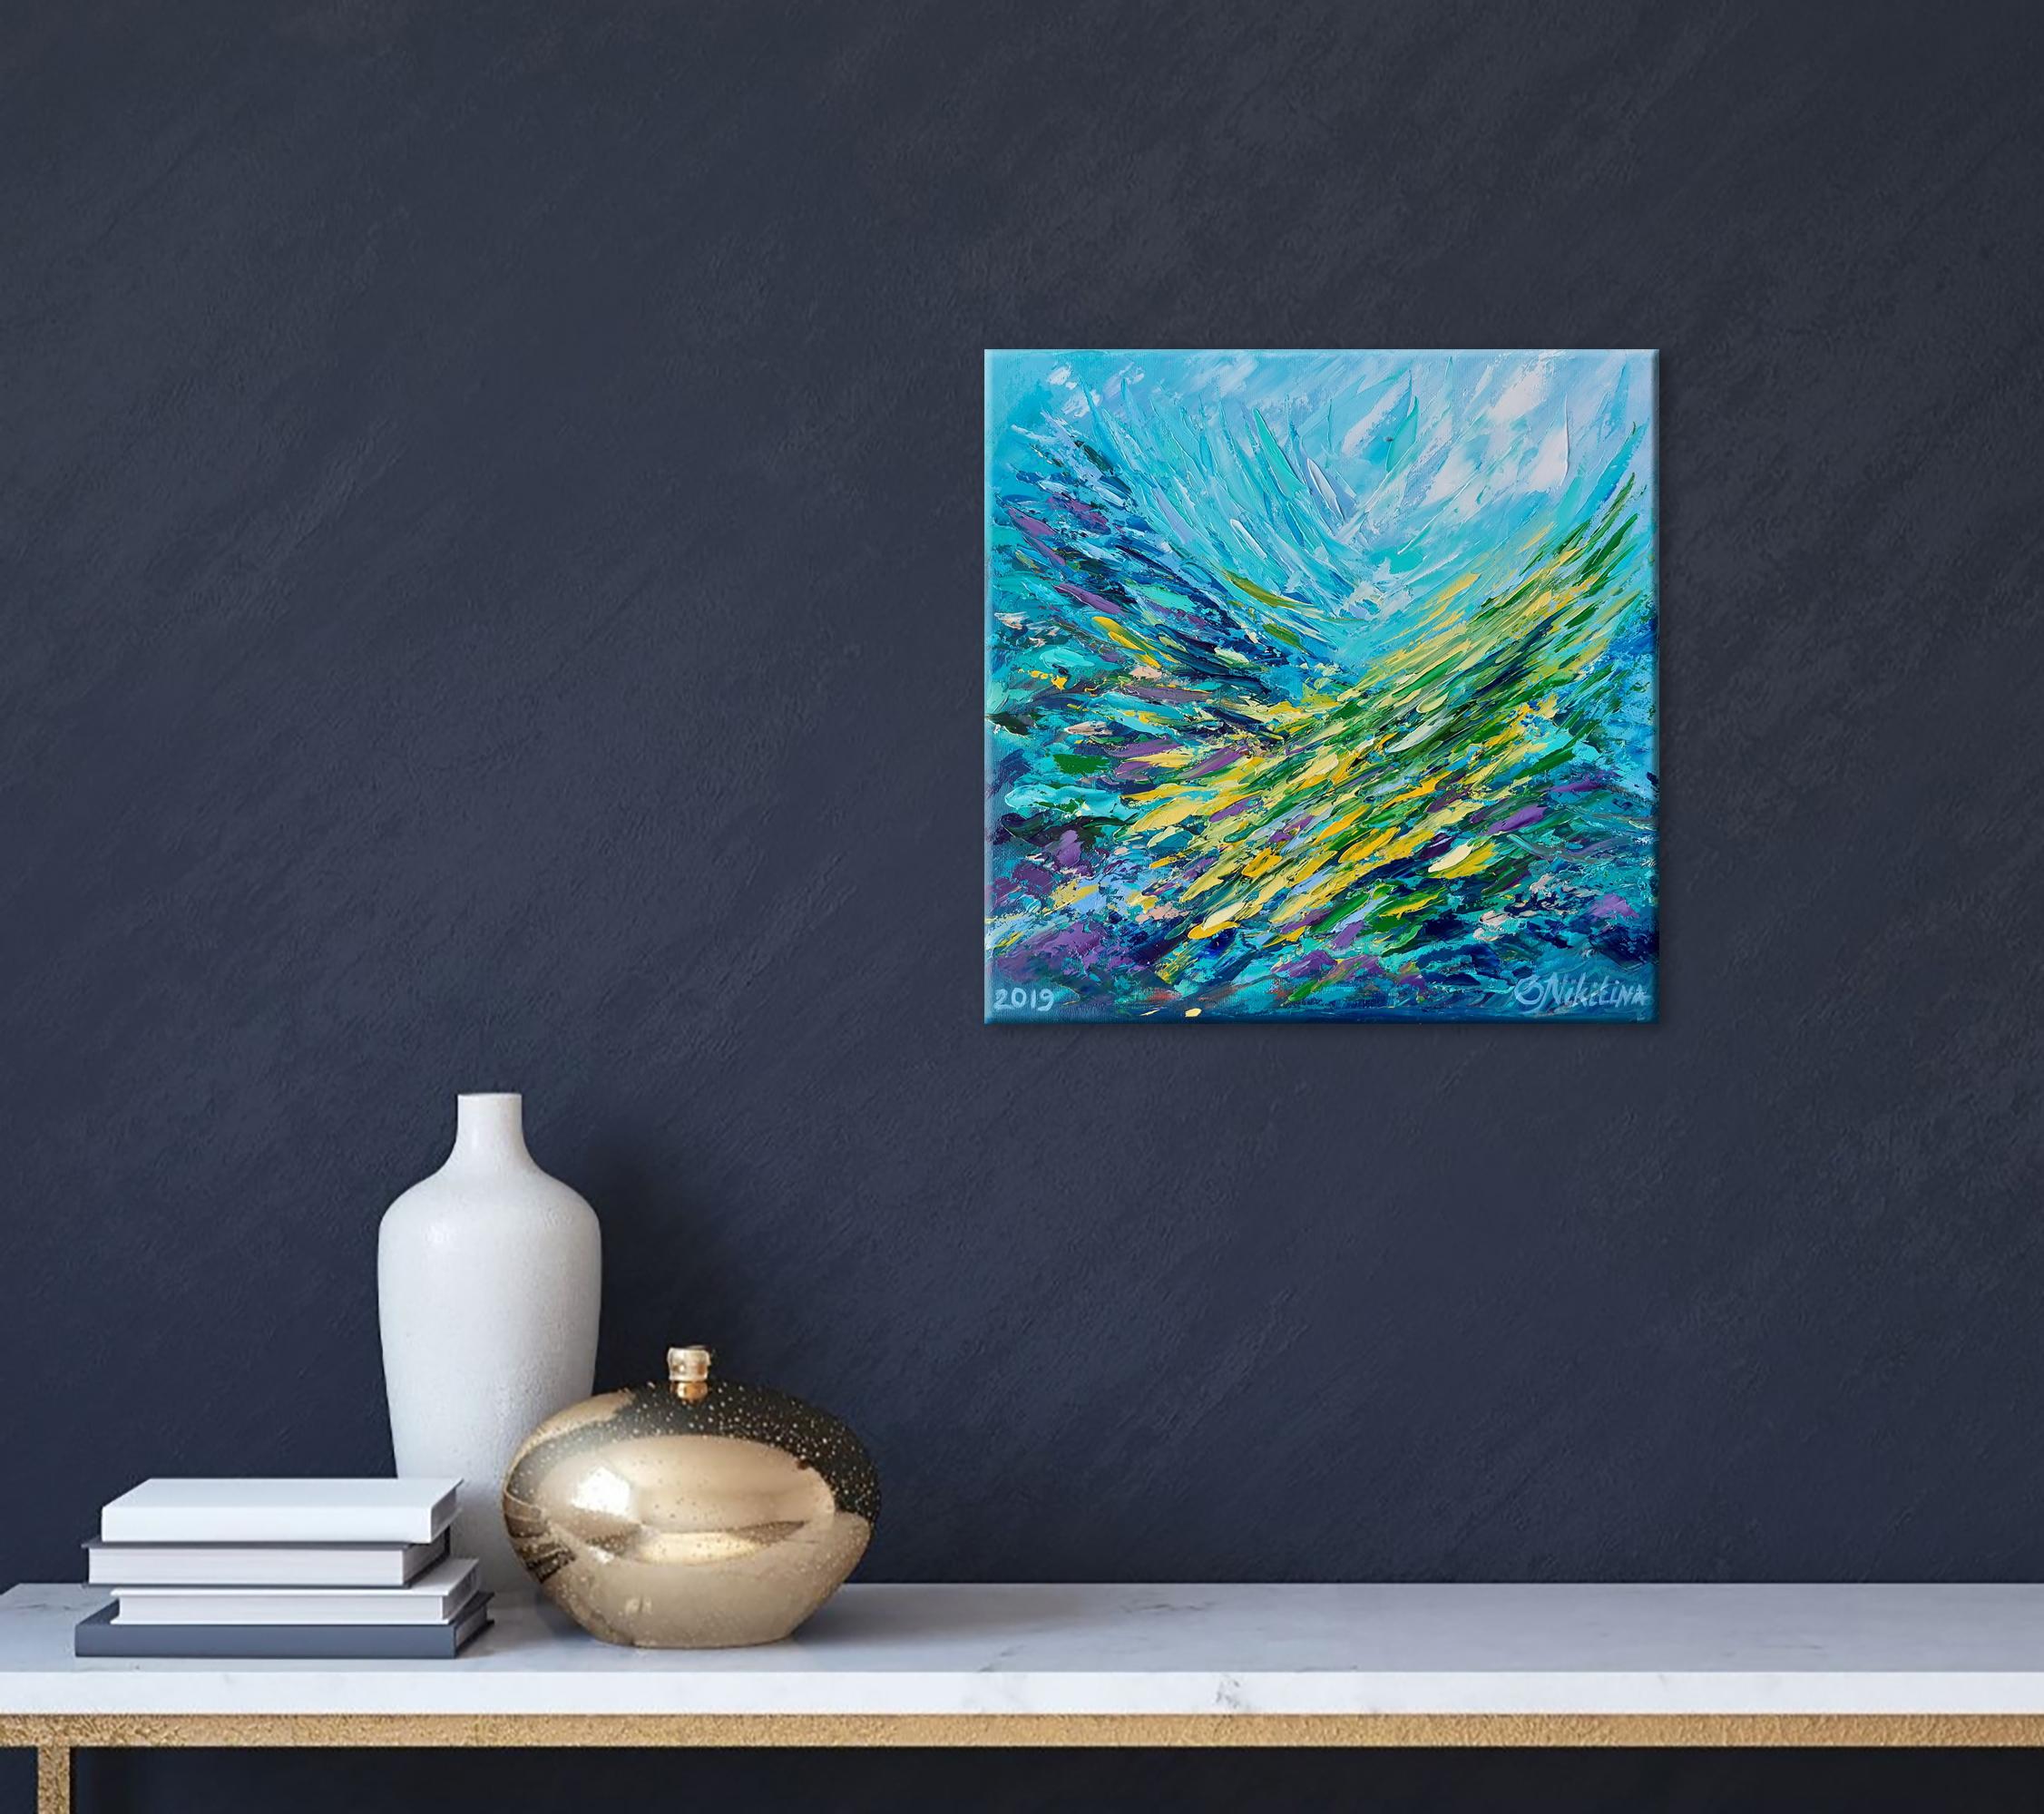 * Title: Hawaii yellow fish
* Size: 10 x 10 inches
* Materials: oil, stretched canvas, palette knife
* Shipping: gallery standards packaging, express shipping
Bright abstract seascape painting will be a good addition to your original oil painting